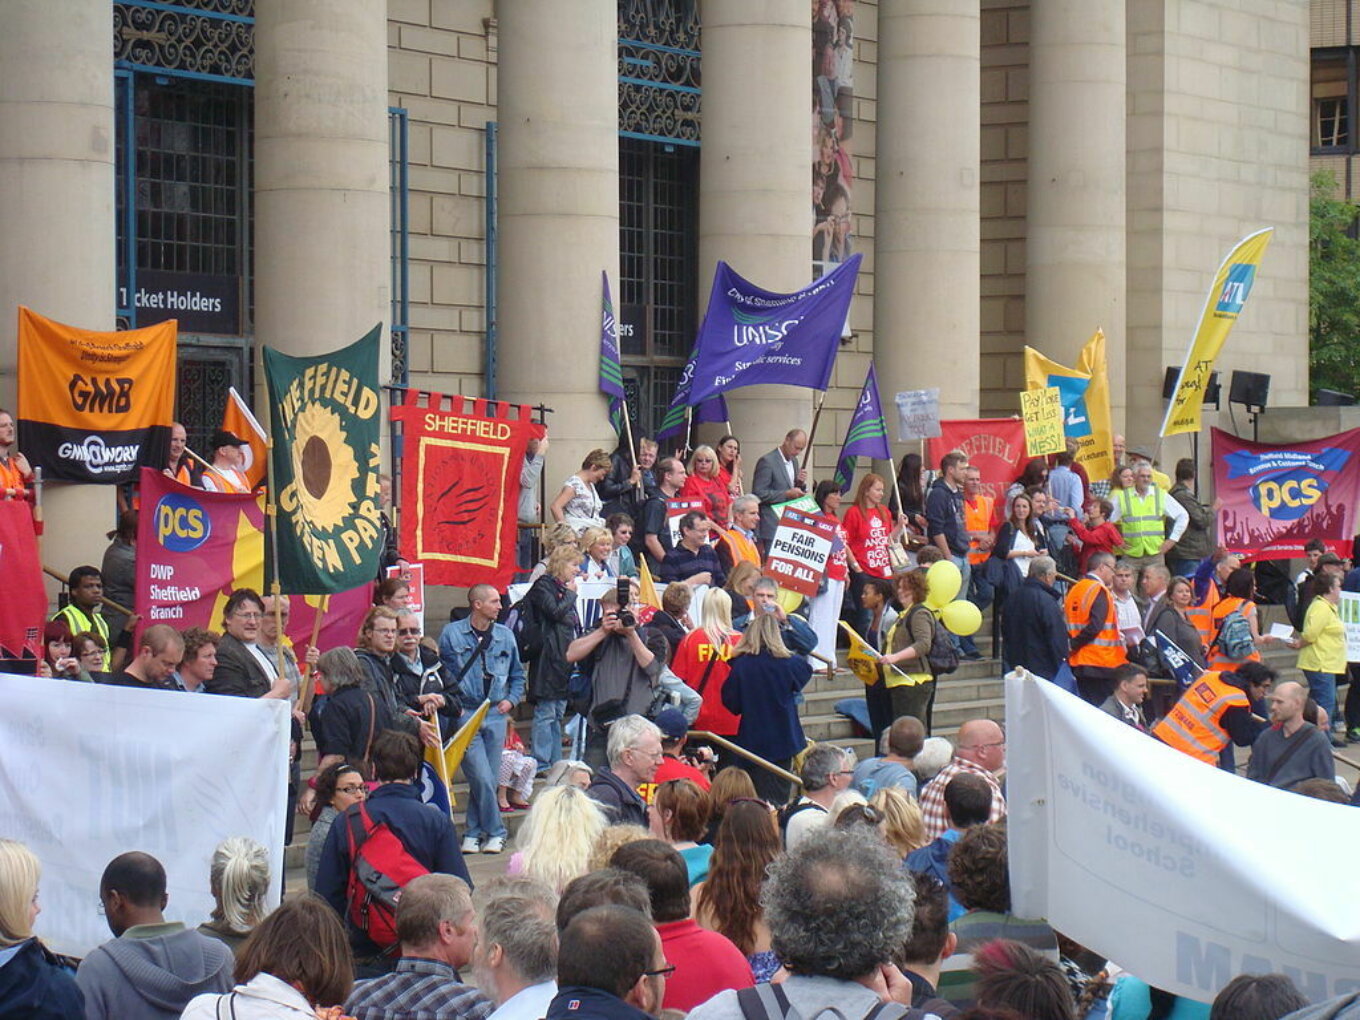 Lots of people and banners on the steps of Sheffield City Hall